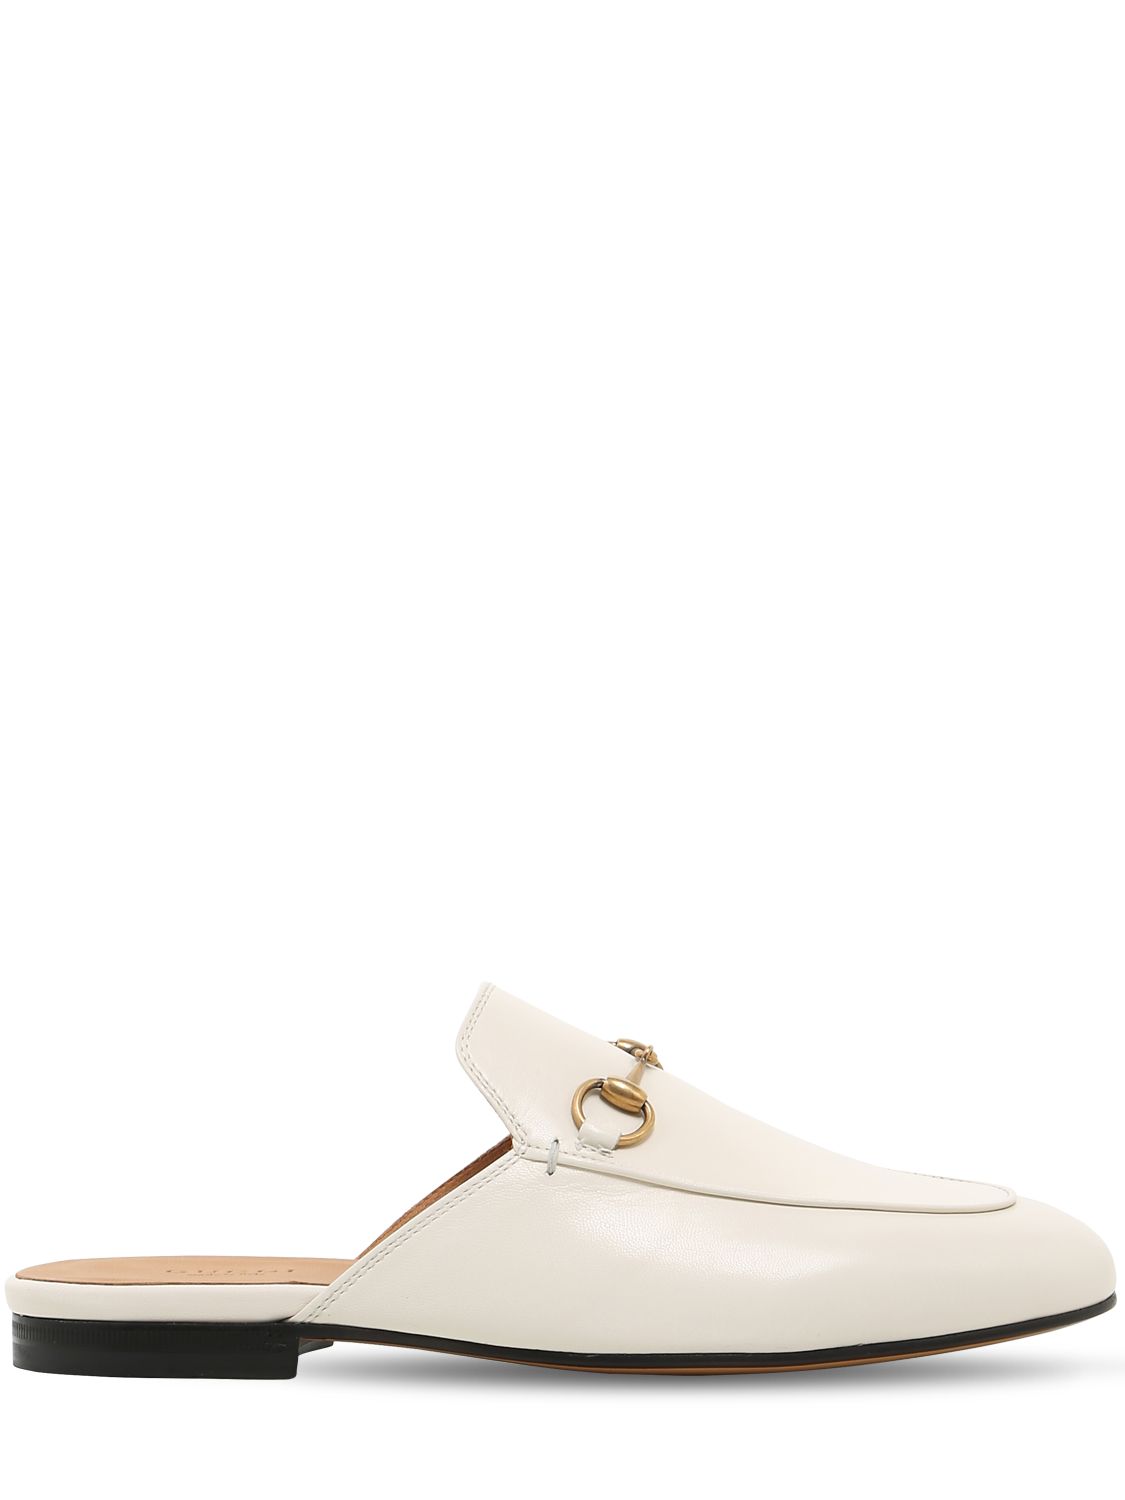 Gucci 10mm Princetown Leather Mules In White